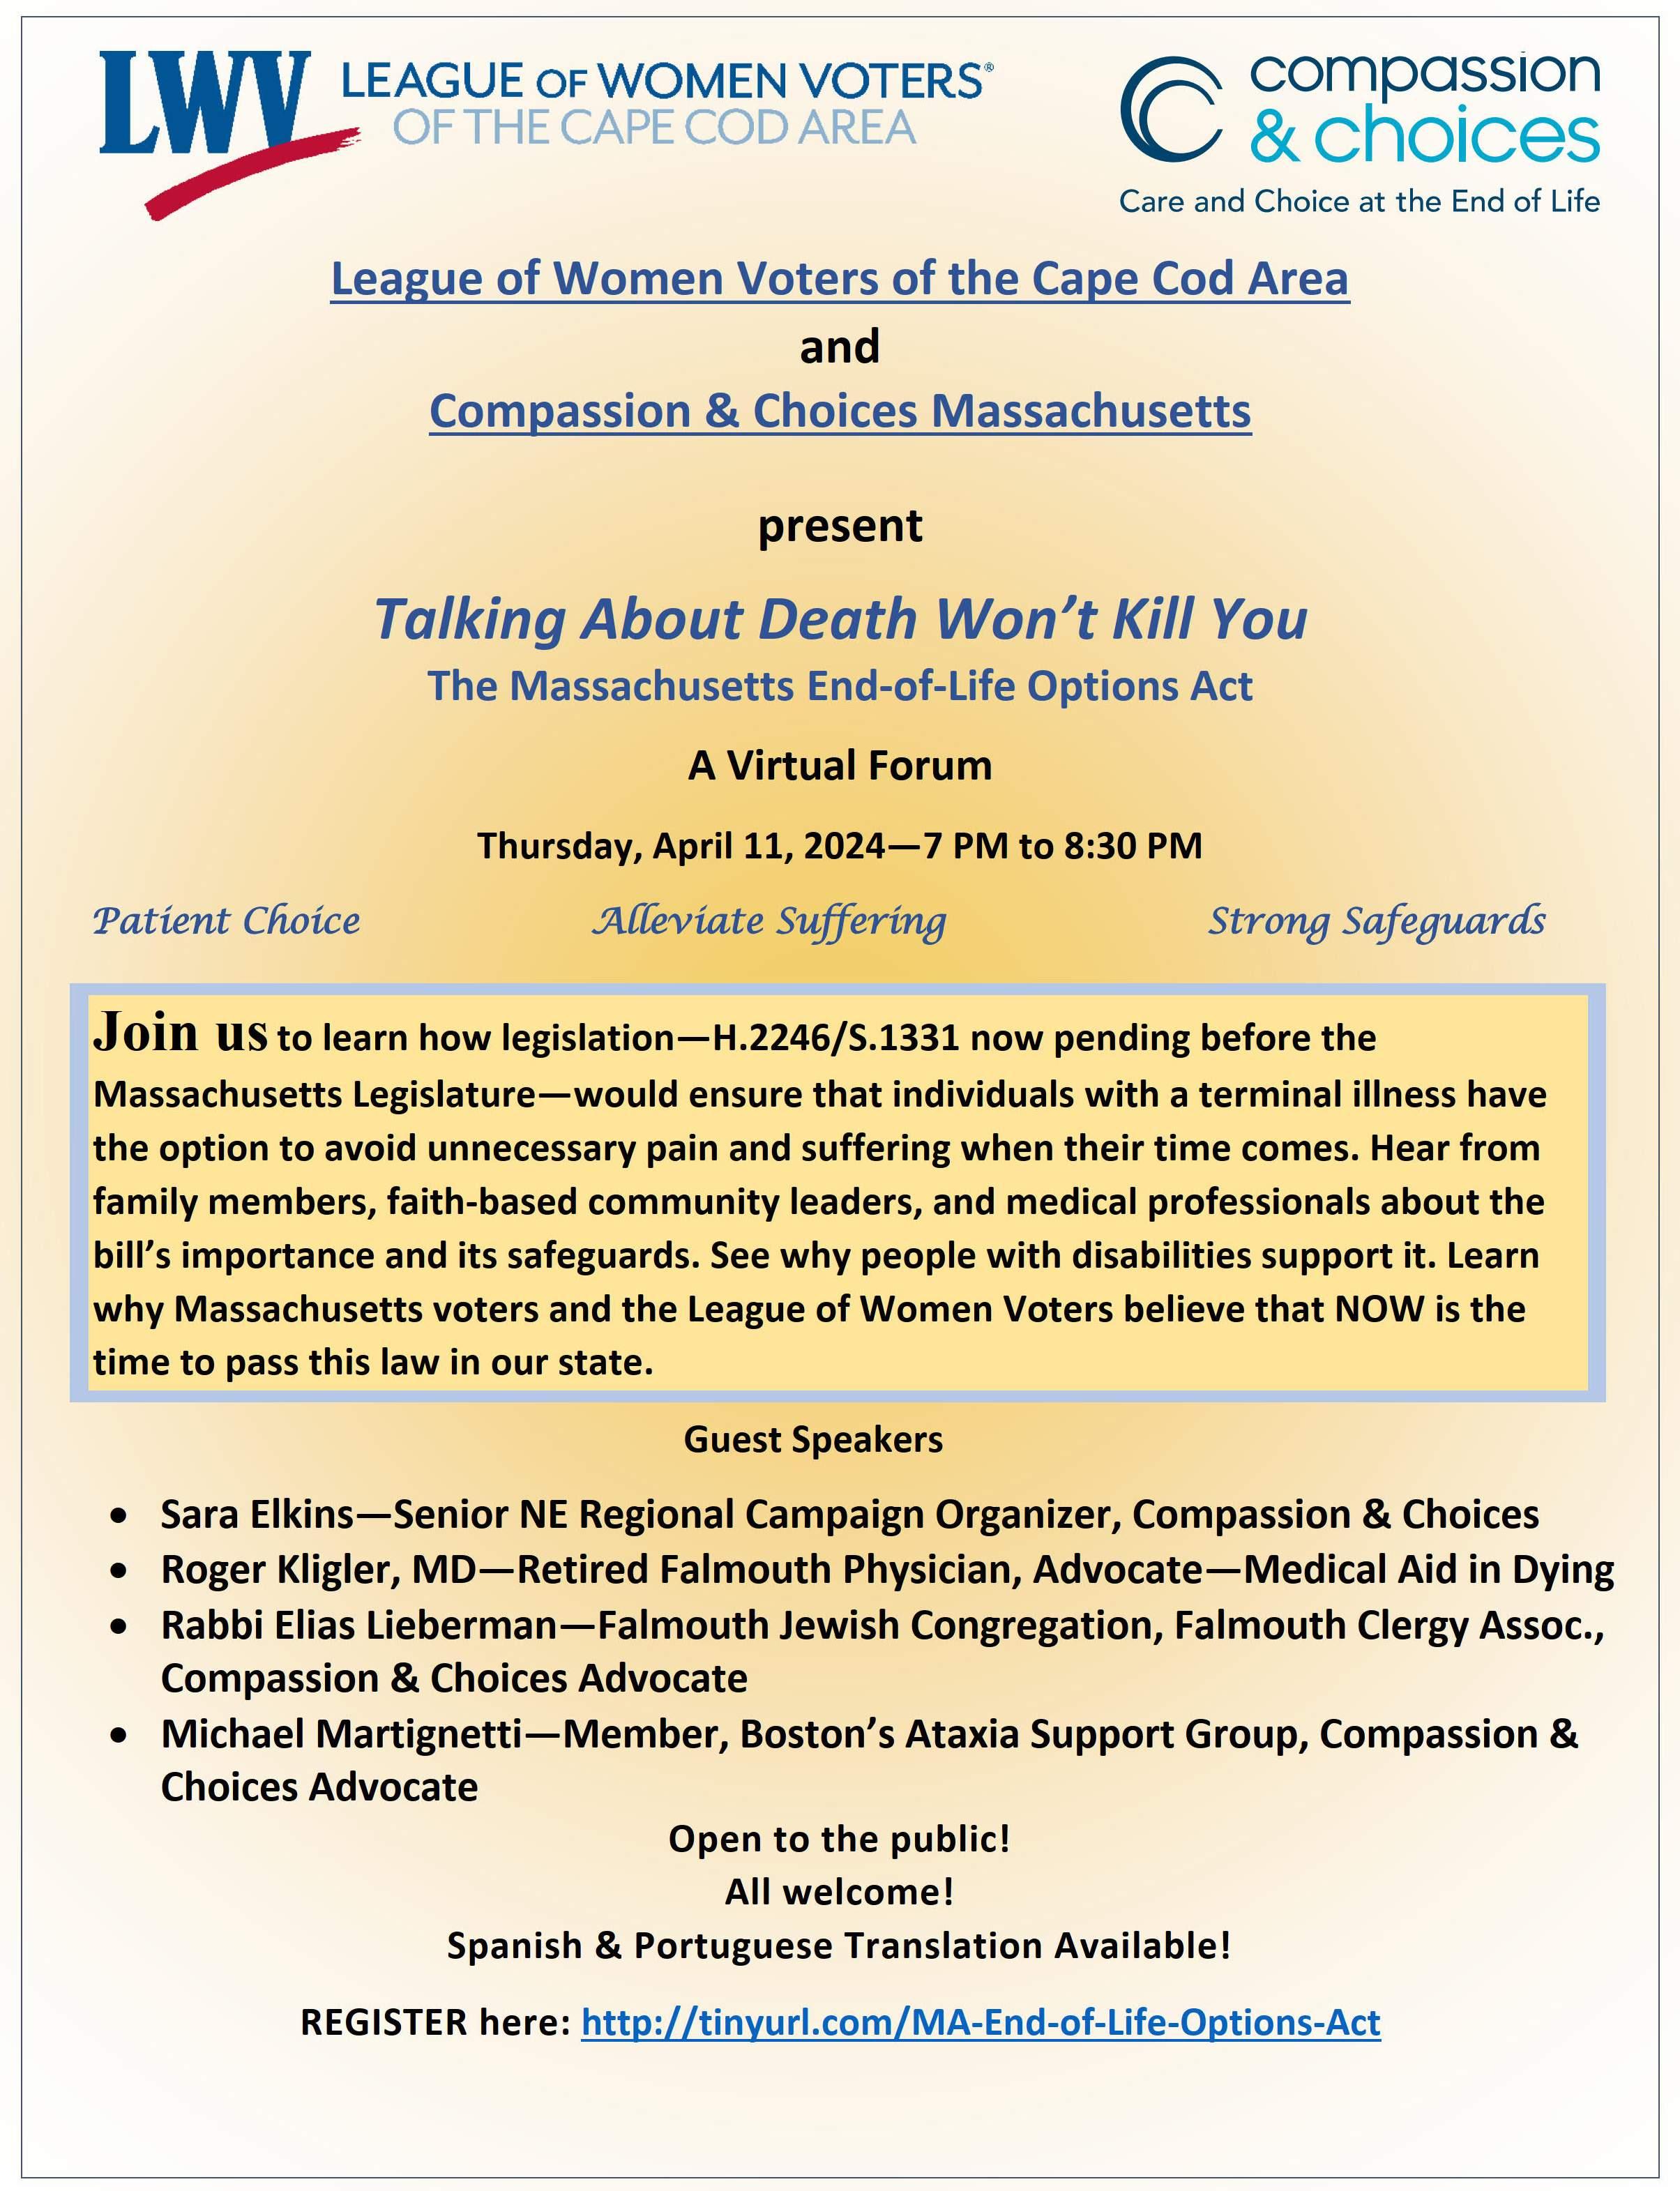 Flyer for April 11 "Talking About Death Won't Kill You" on-line event